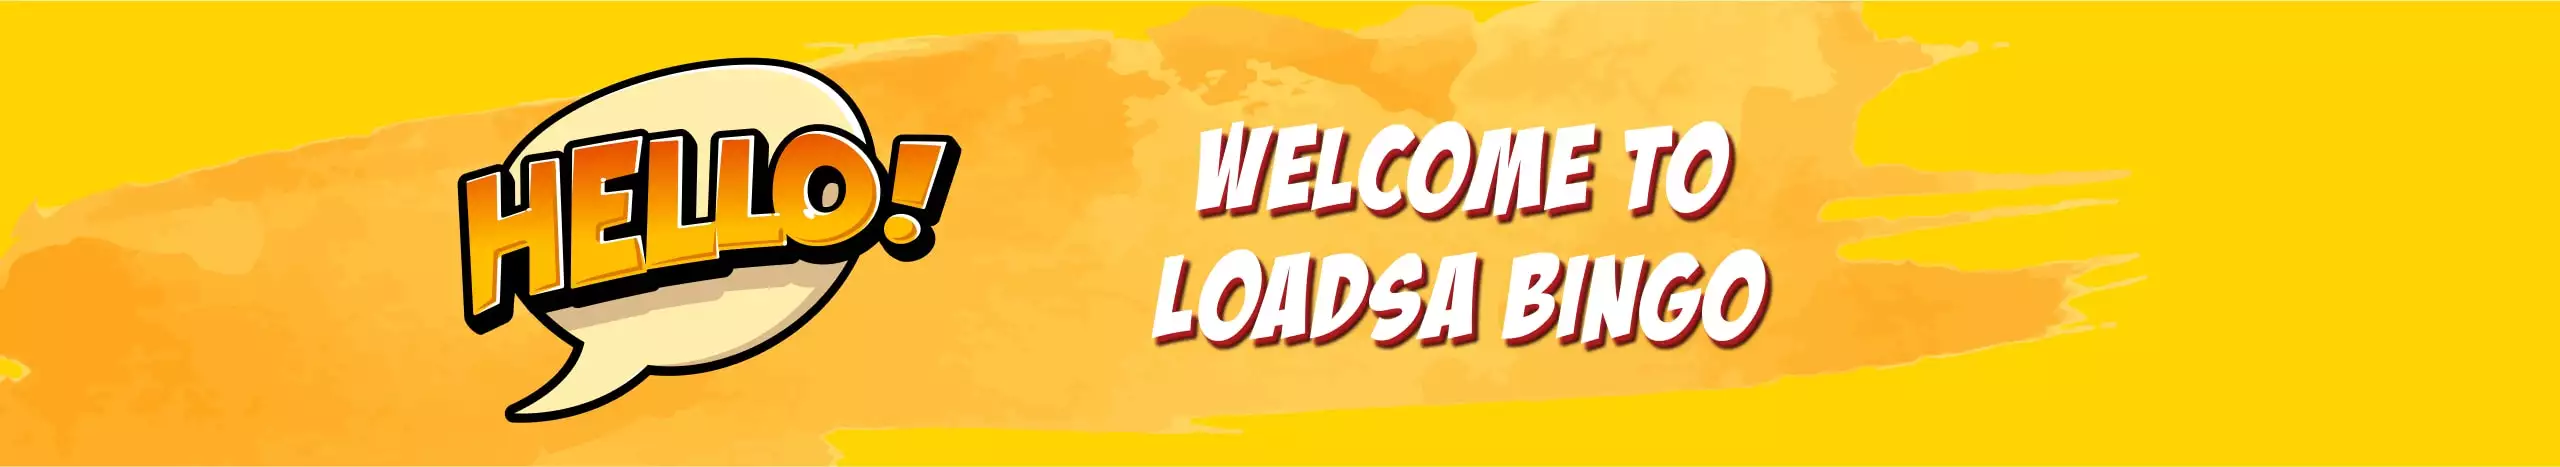 Loadsa Bingo extends entertaining bingo & online slot promotions on a weekly & monthly basis. Get more details here!